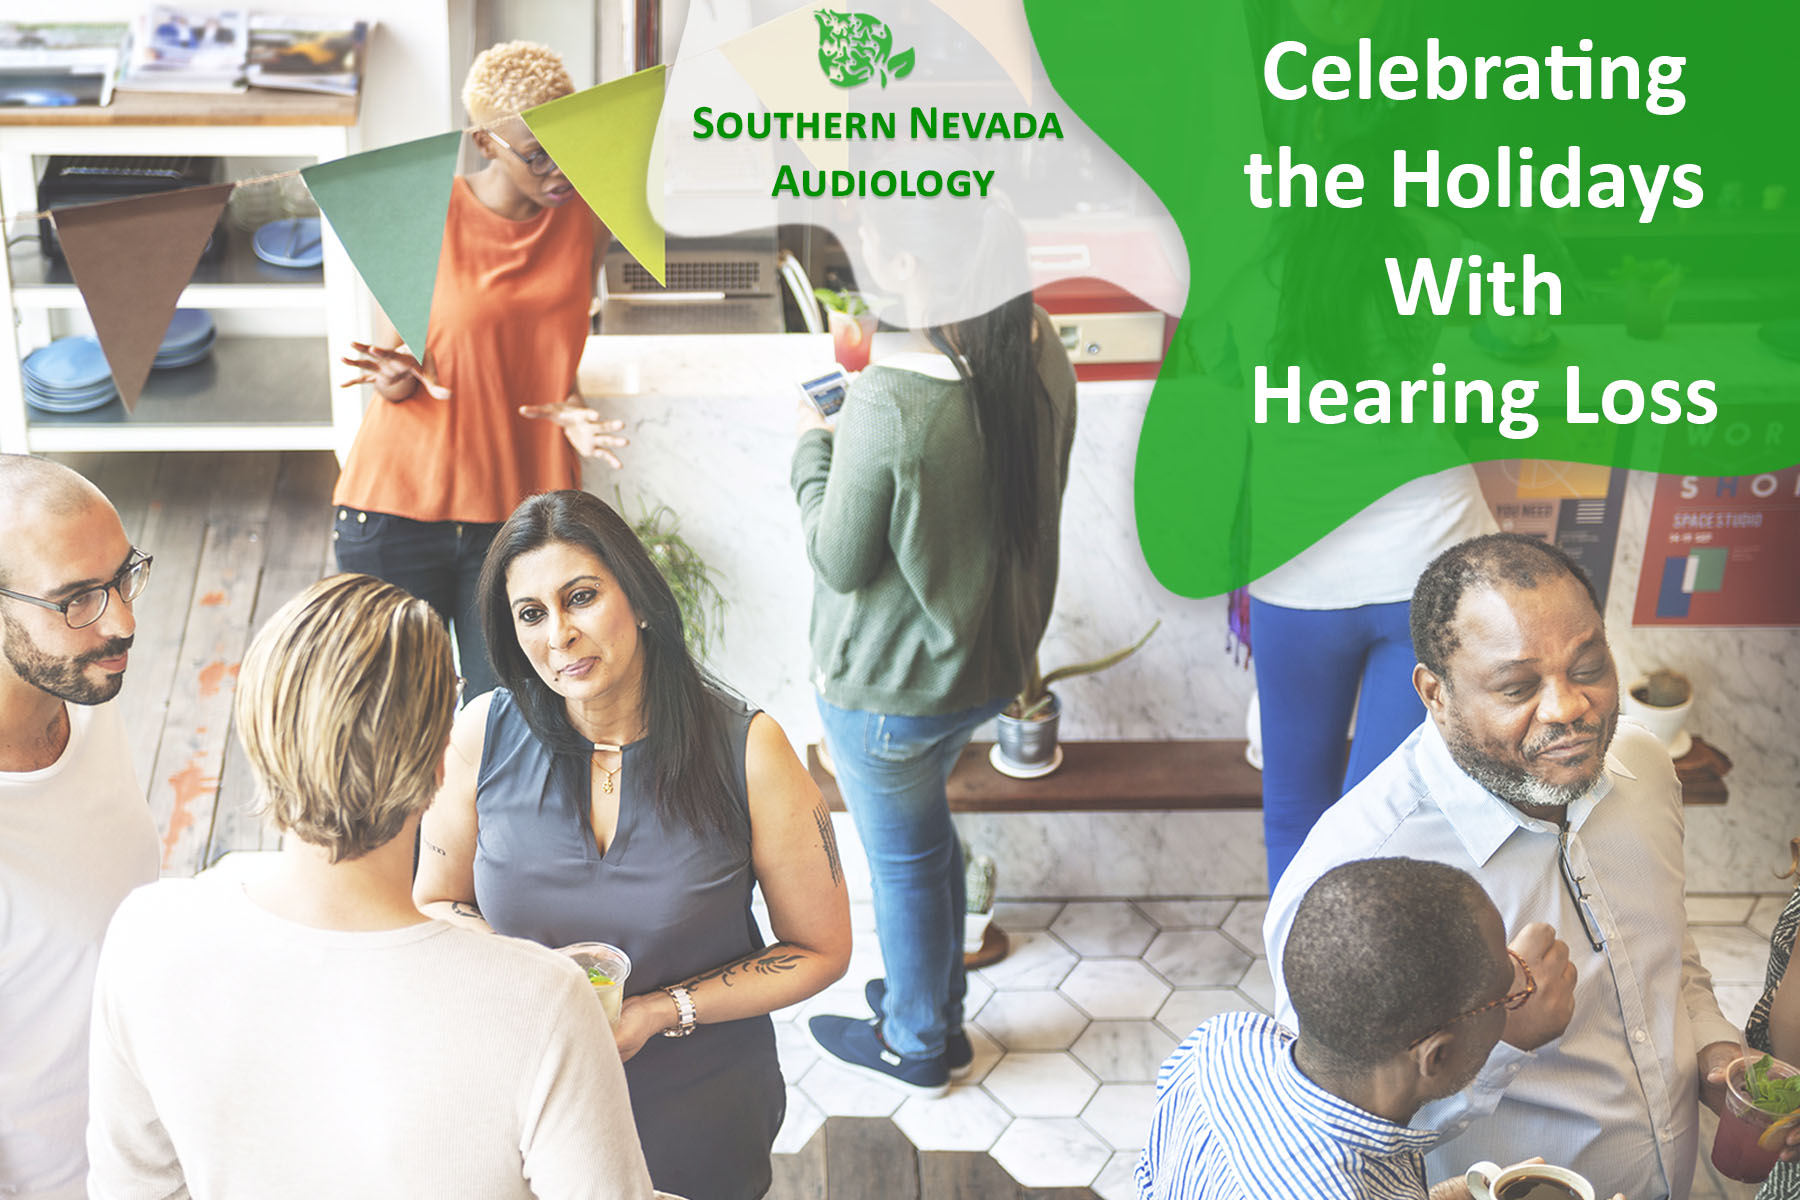 Celebrating the Holidays With Hearing Loss